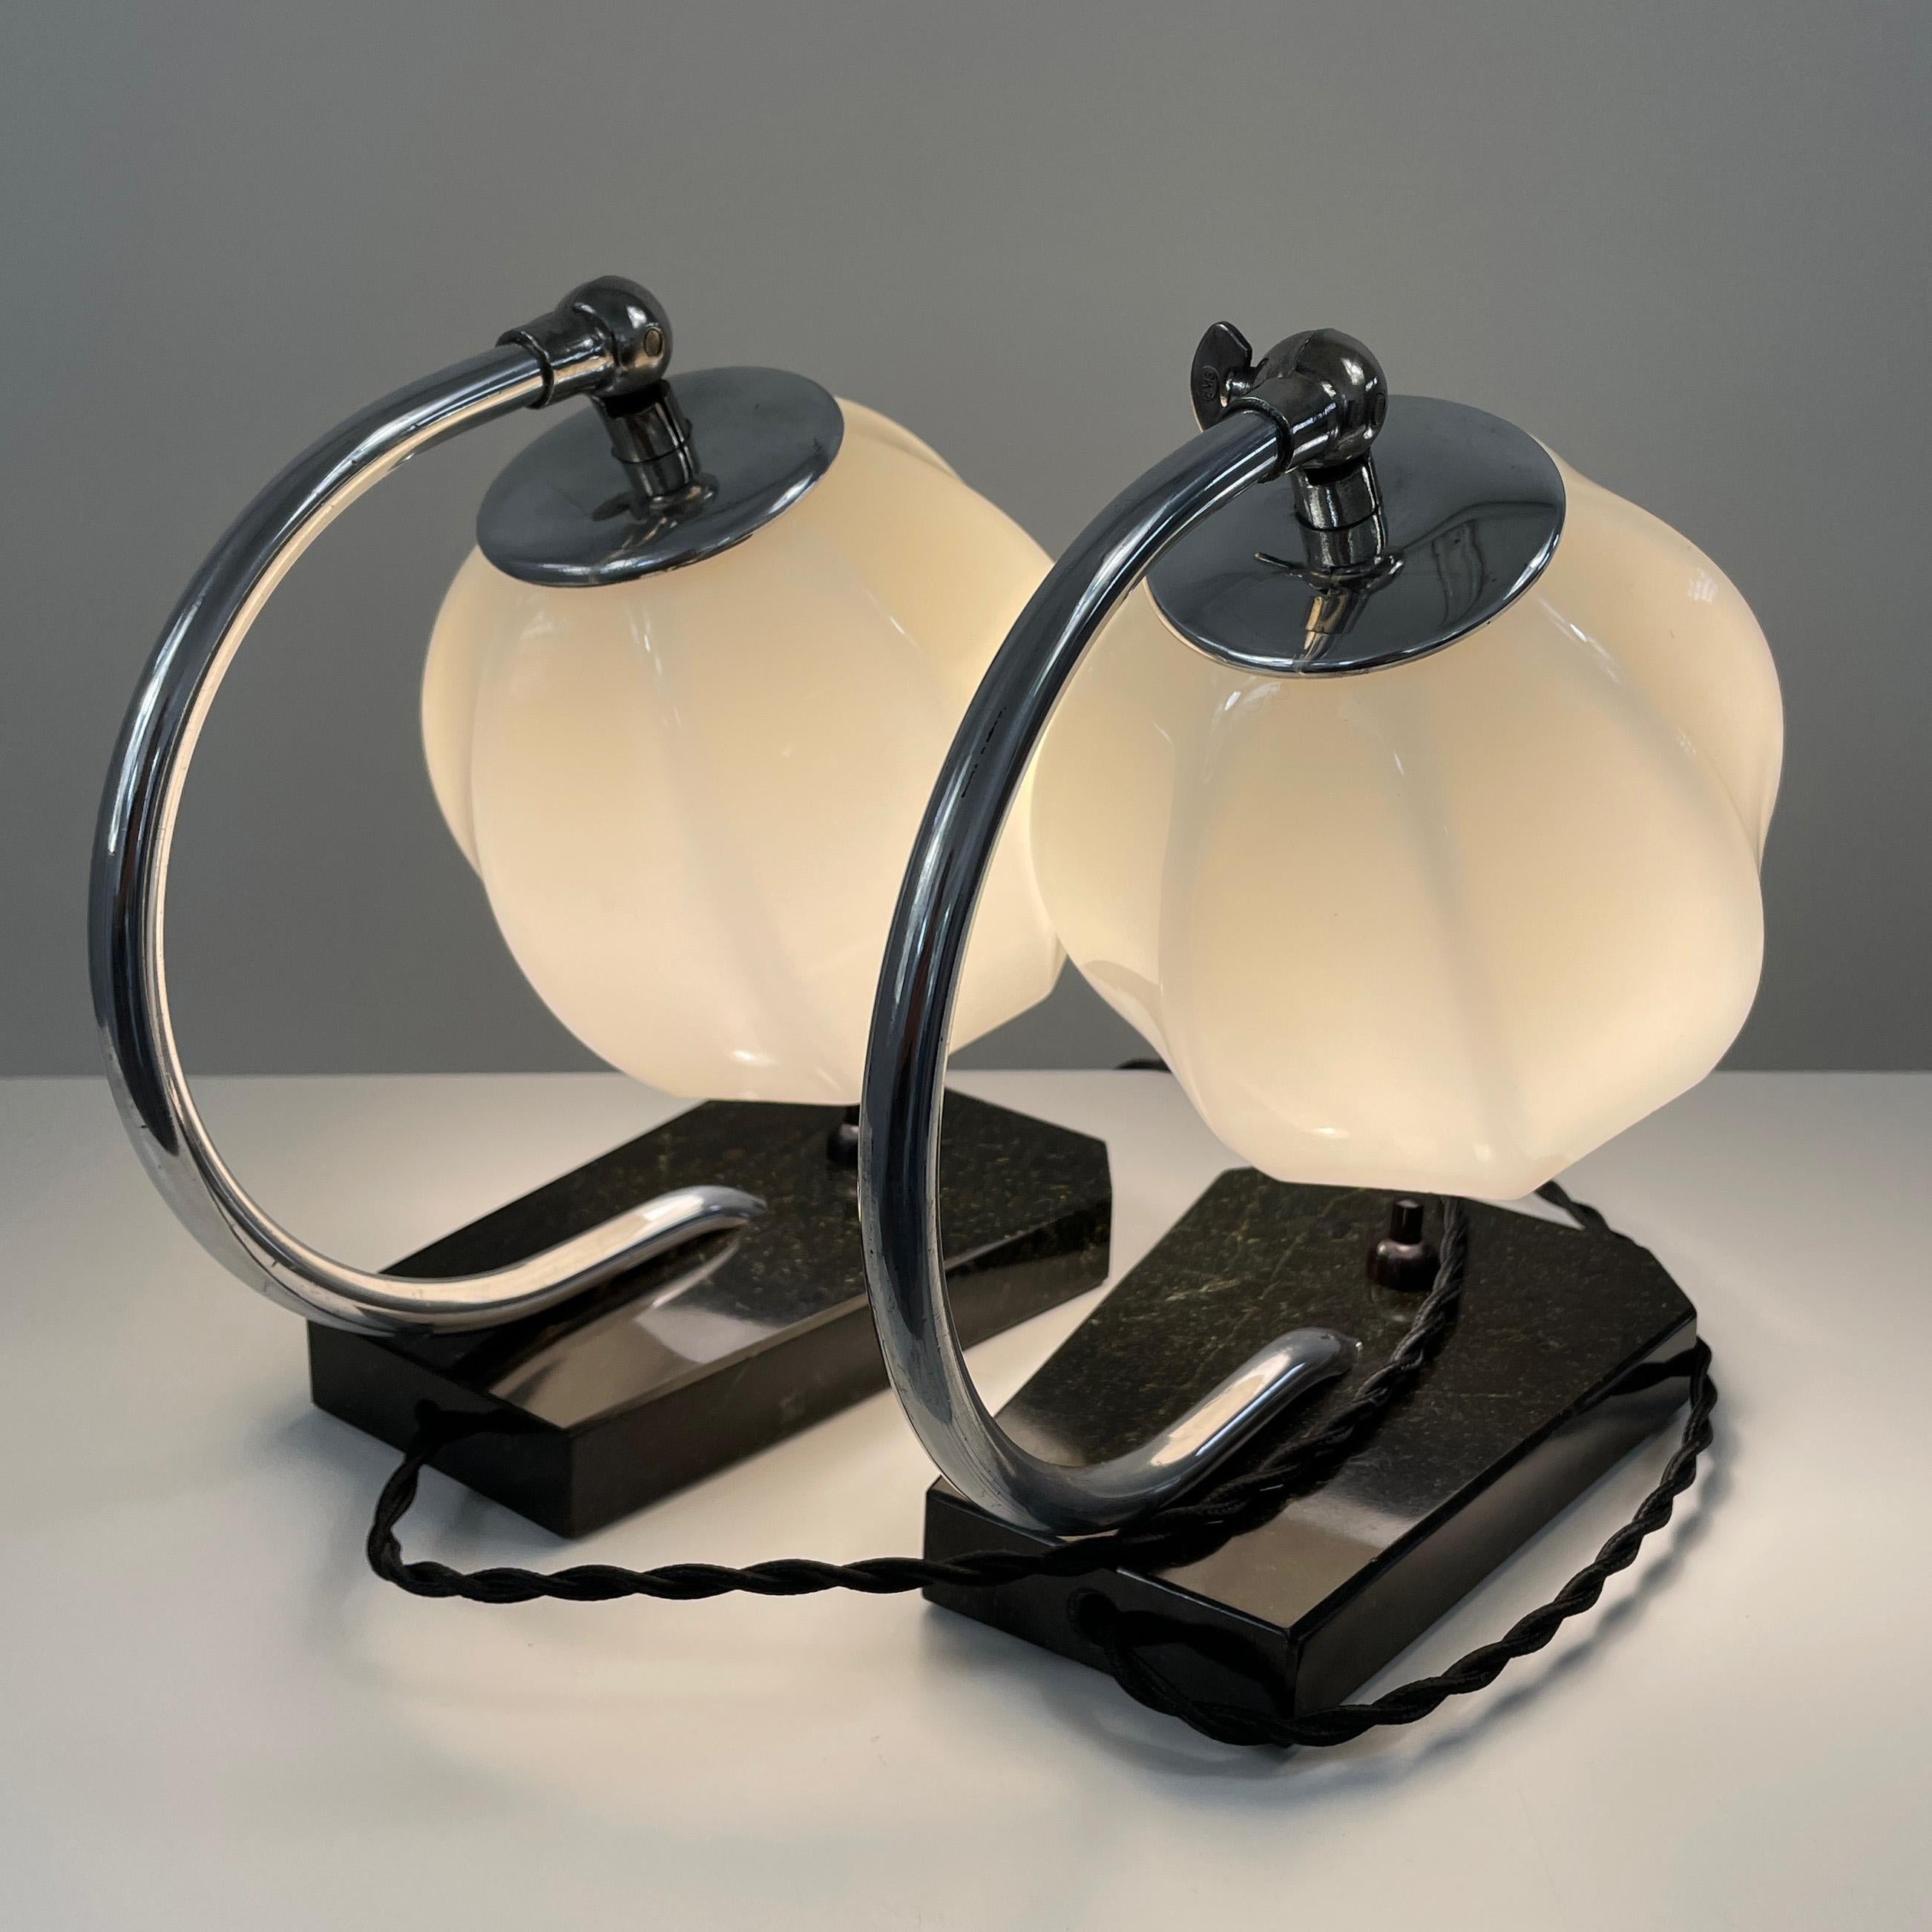 German Art Deco Opaline Glass, Marble and Aluminum Table Lamps, 1930s For Sale 5